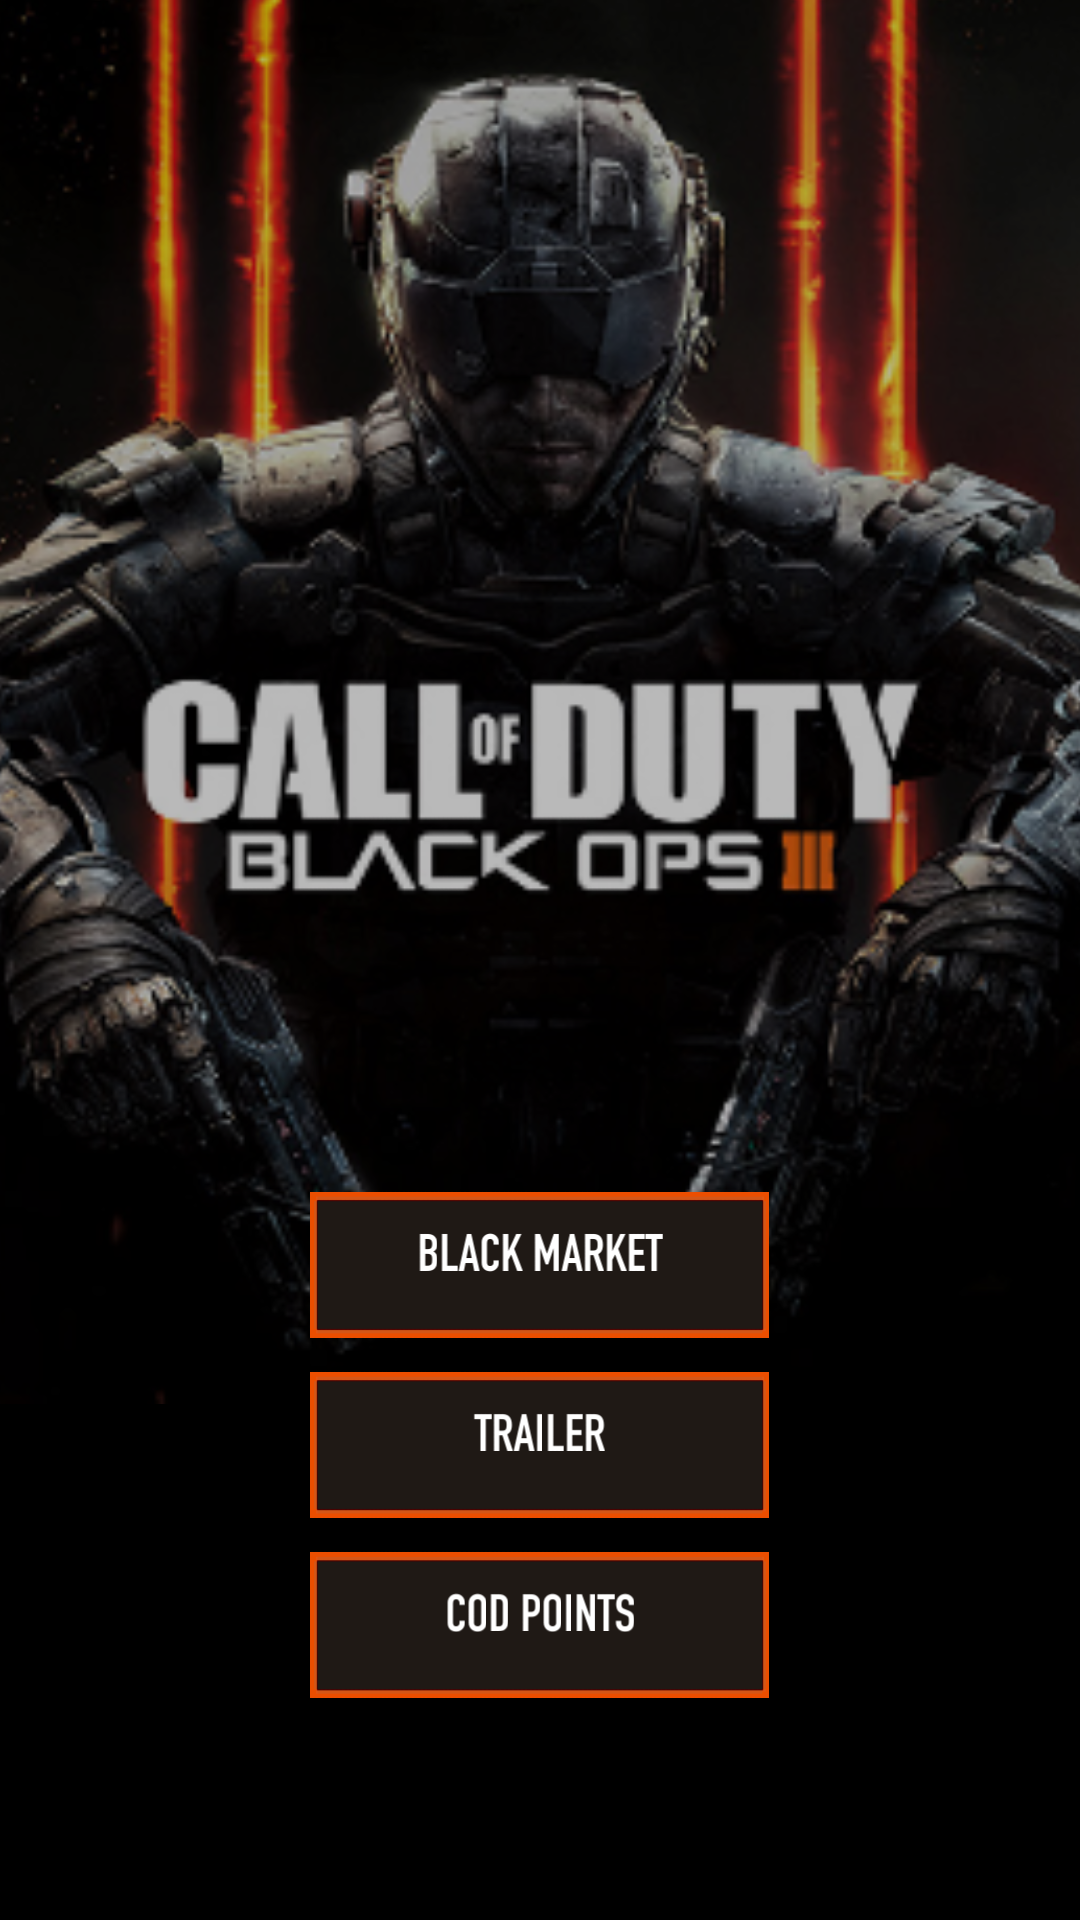 Call of Duty Black Ops III Pts for Android - APK Download - 